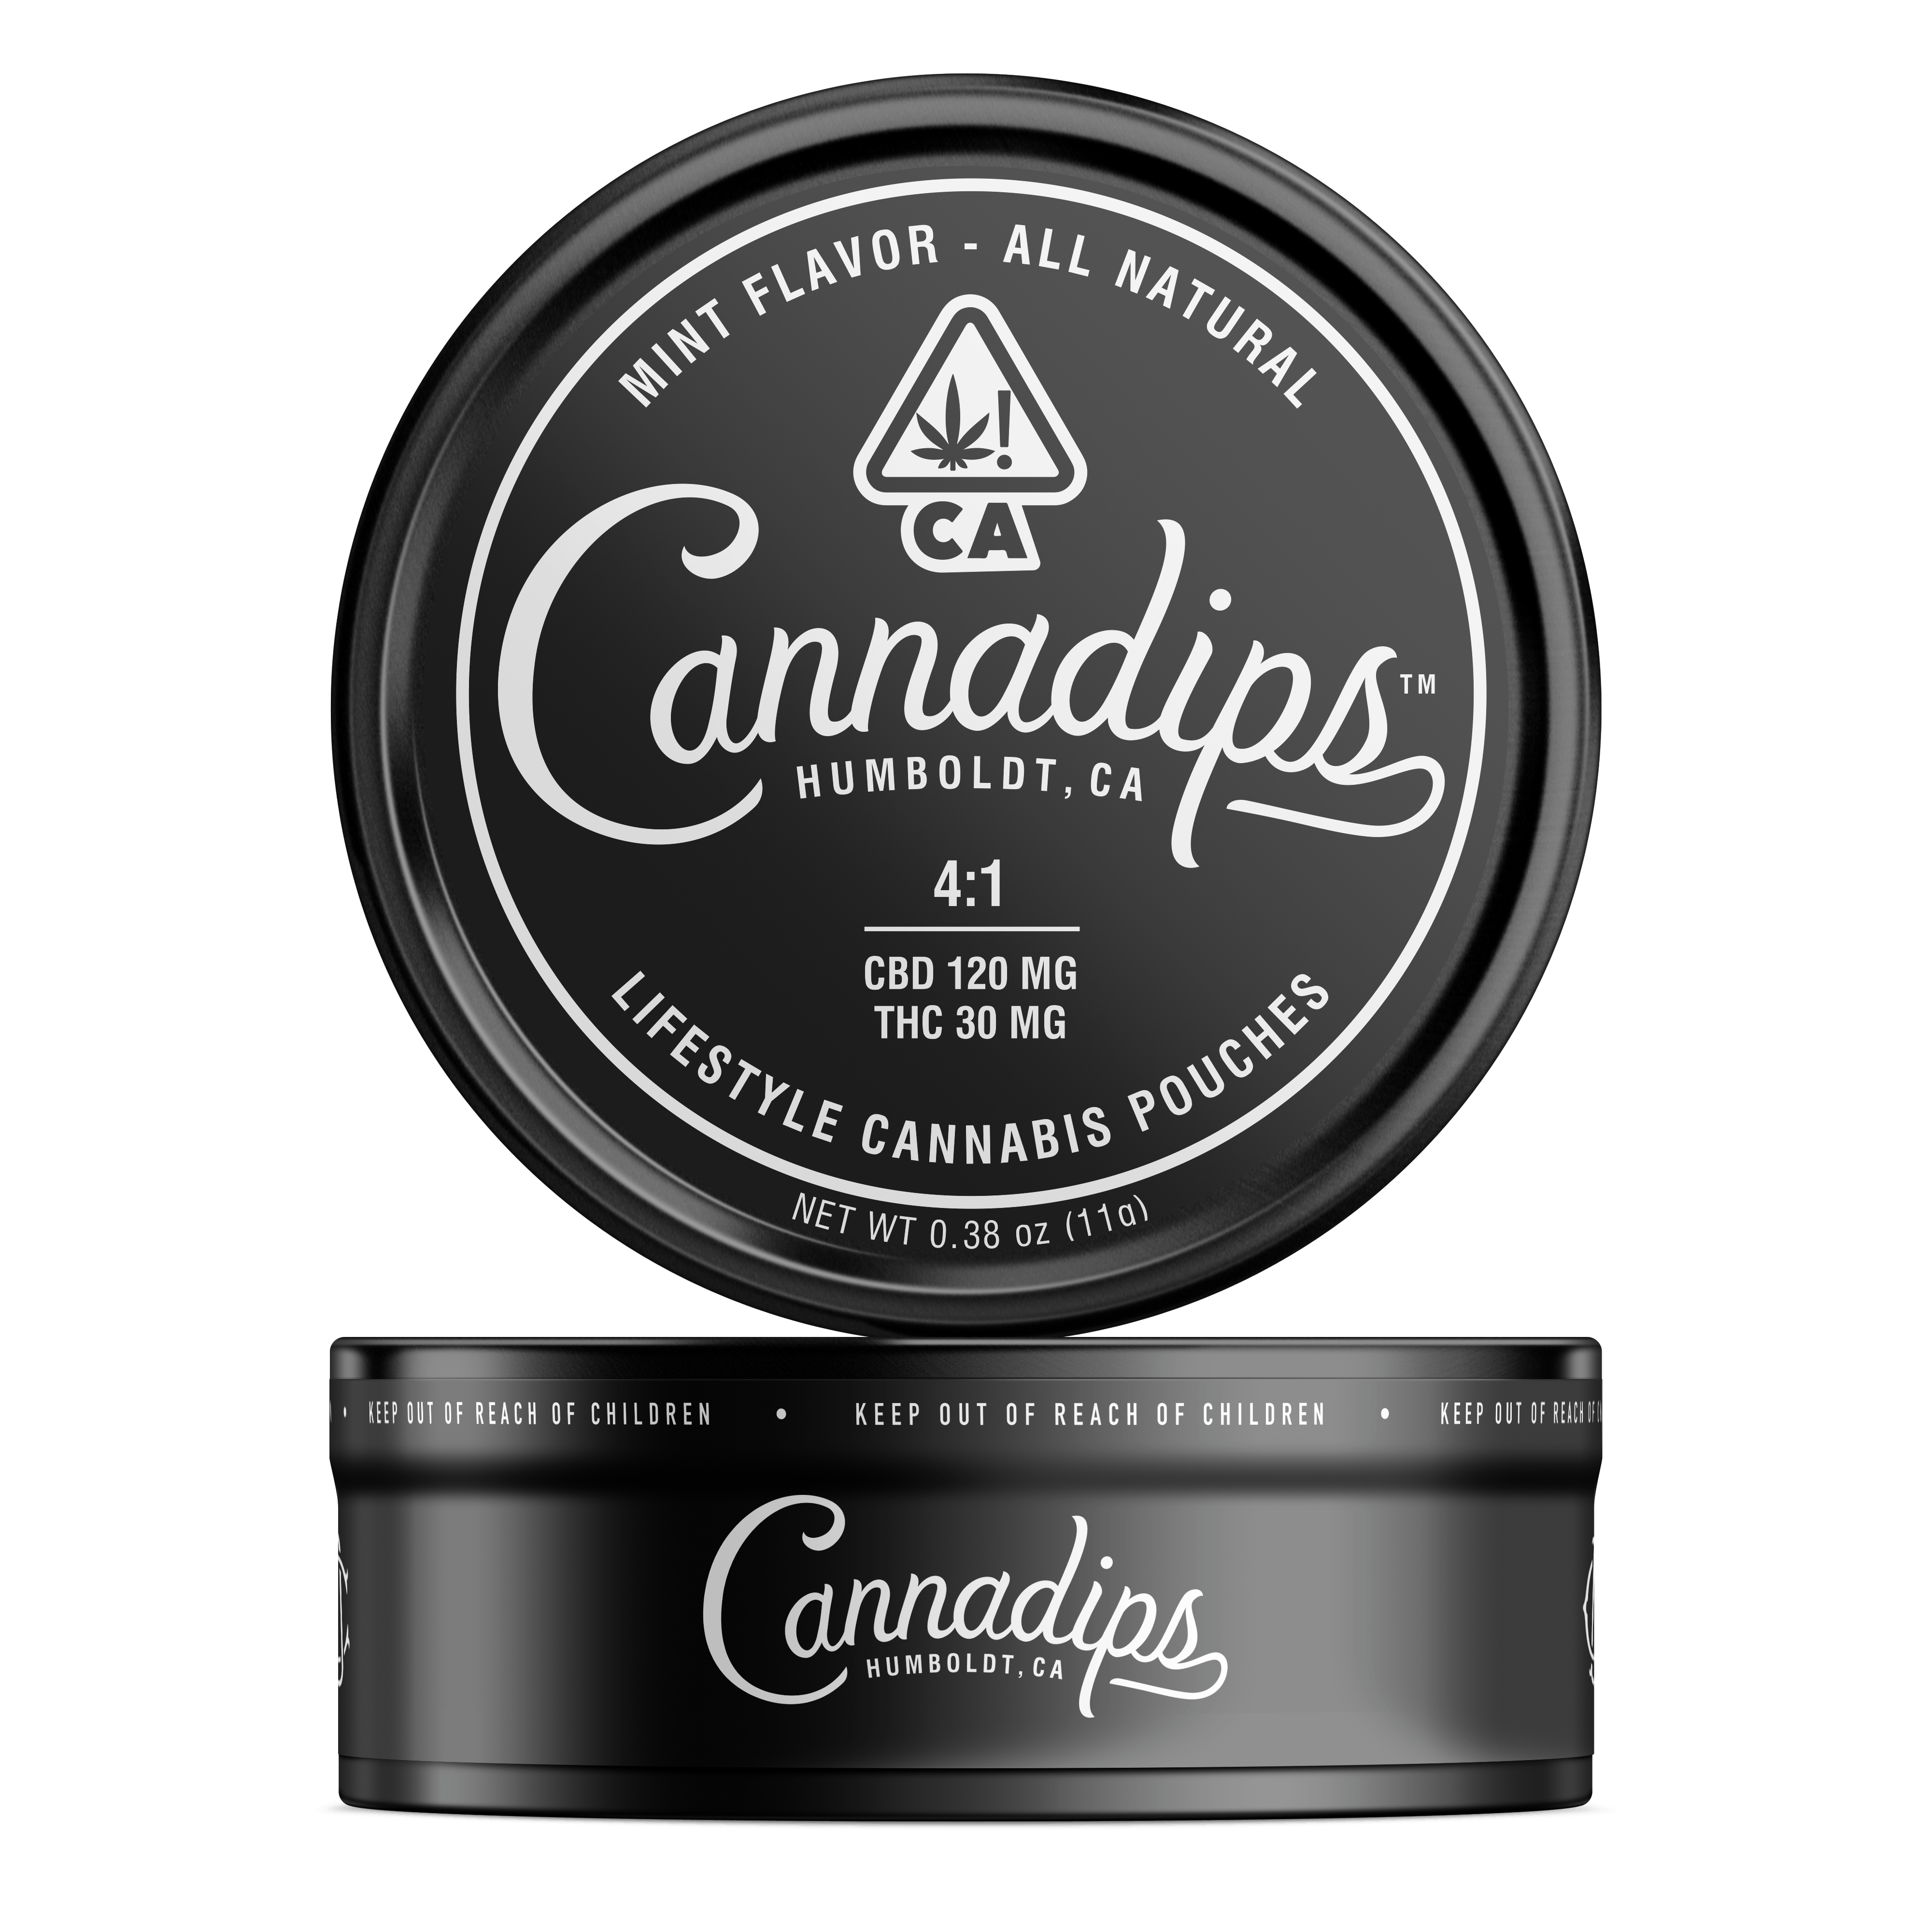 marijuana-dispensaries-patients-and-caregivers-in-north-hollywood-cannadips-mint-41-pouches-cbd-2c-mirco-dose-tin